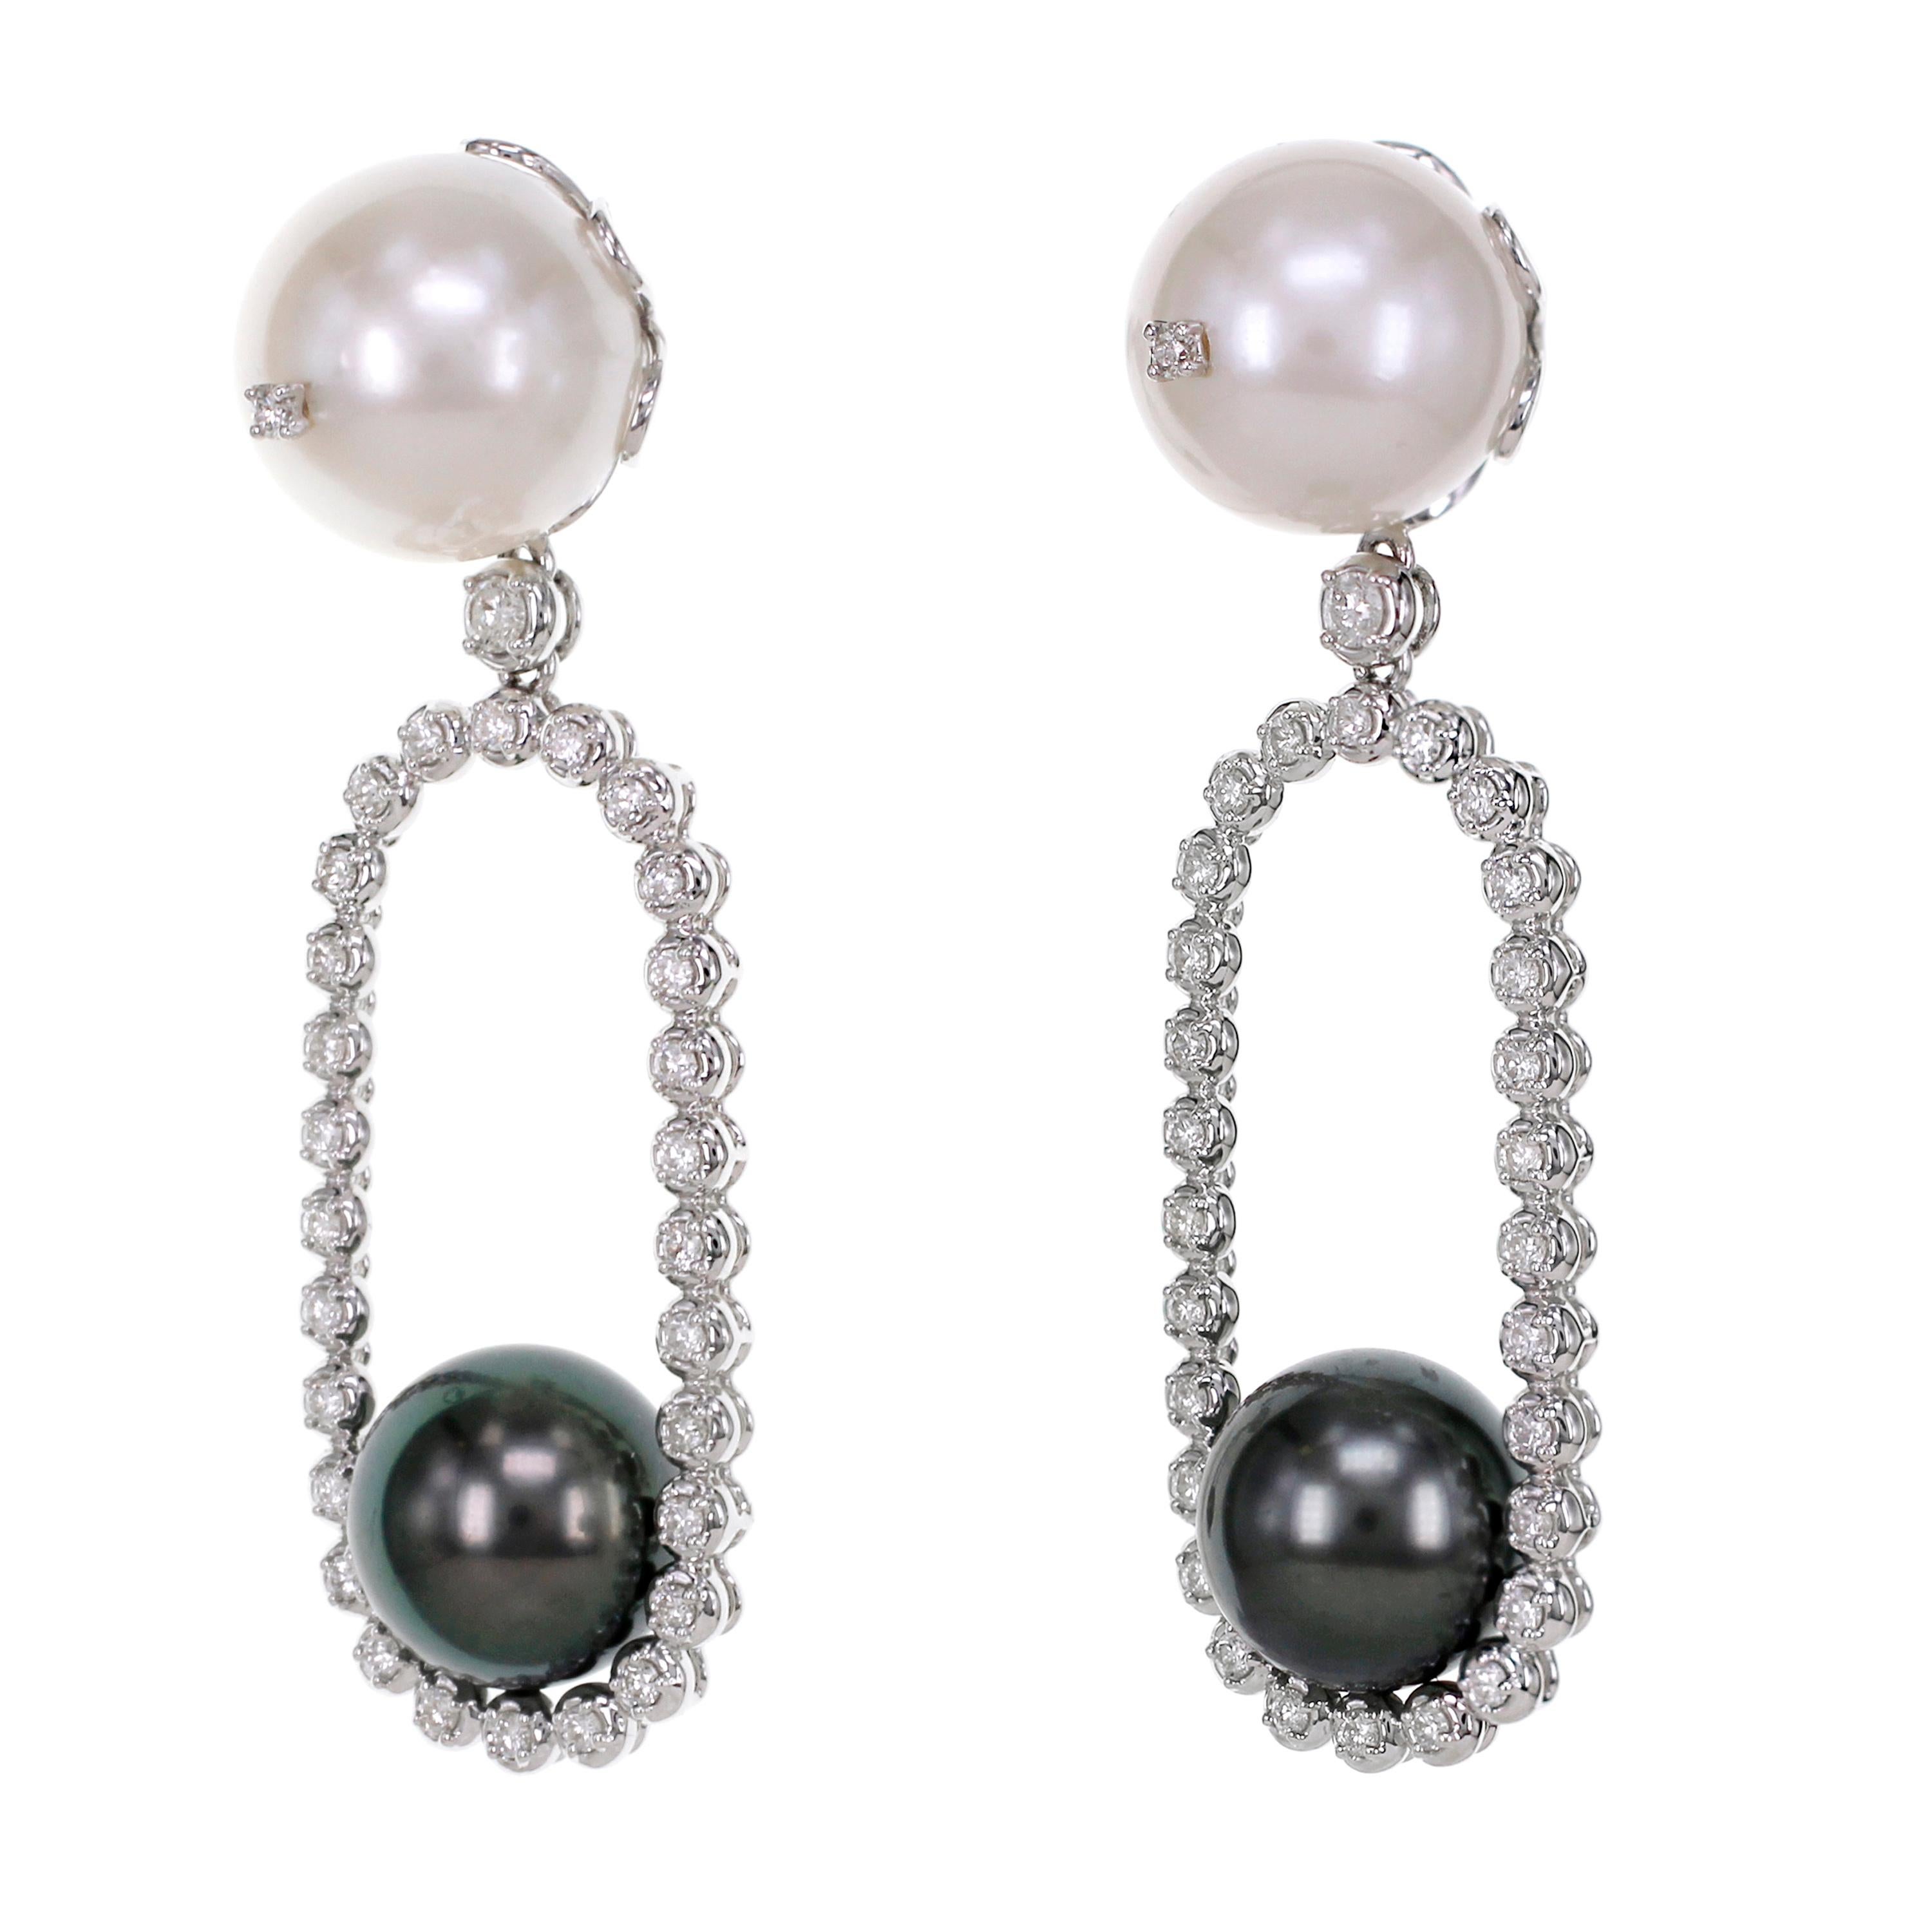 Inspired by Yin and Yang concept, the earring has 18.55 carat of black Tahitian Pearl and 28.30 carat of white South Sea Pearl. On the south sea pearl, we have embedded 2 pieces of white diamond in our trademark ' Stone in Stone ' design.